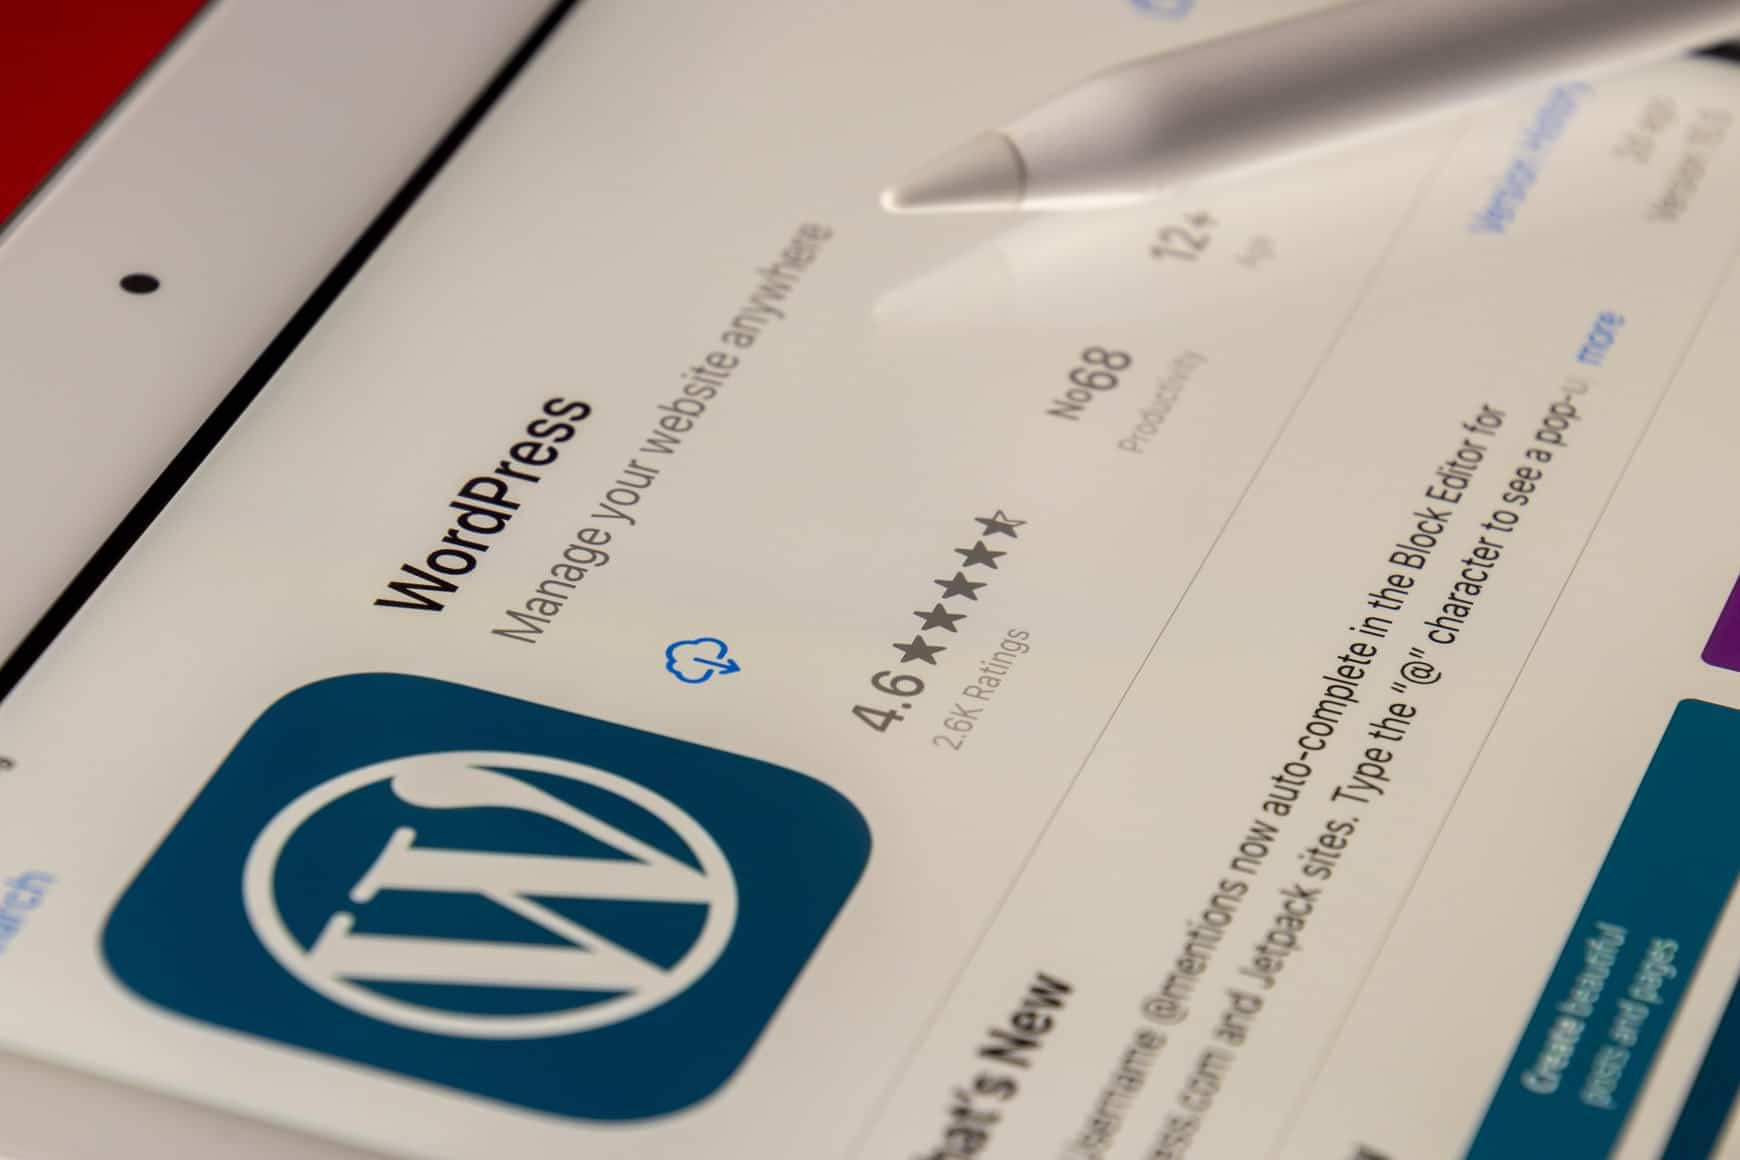 We take care of your wordpress site so you can take care of business.